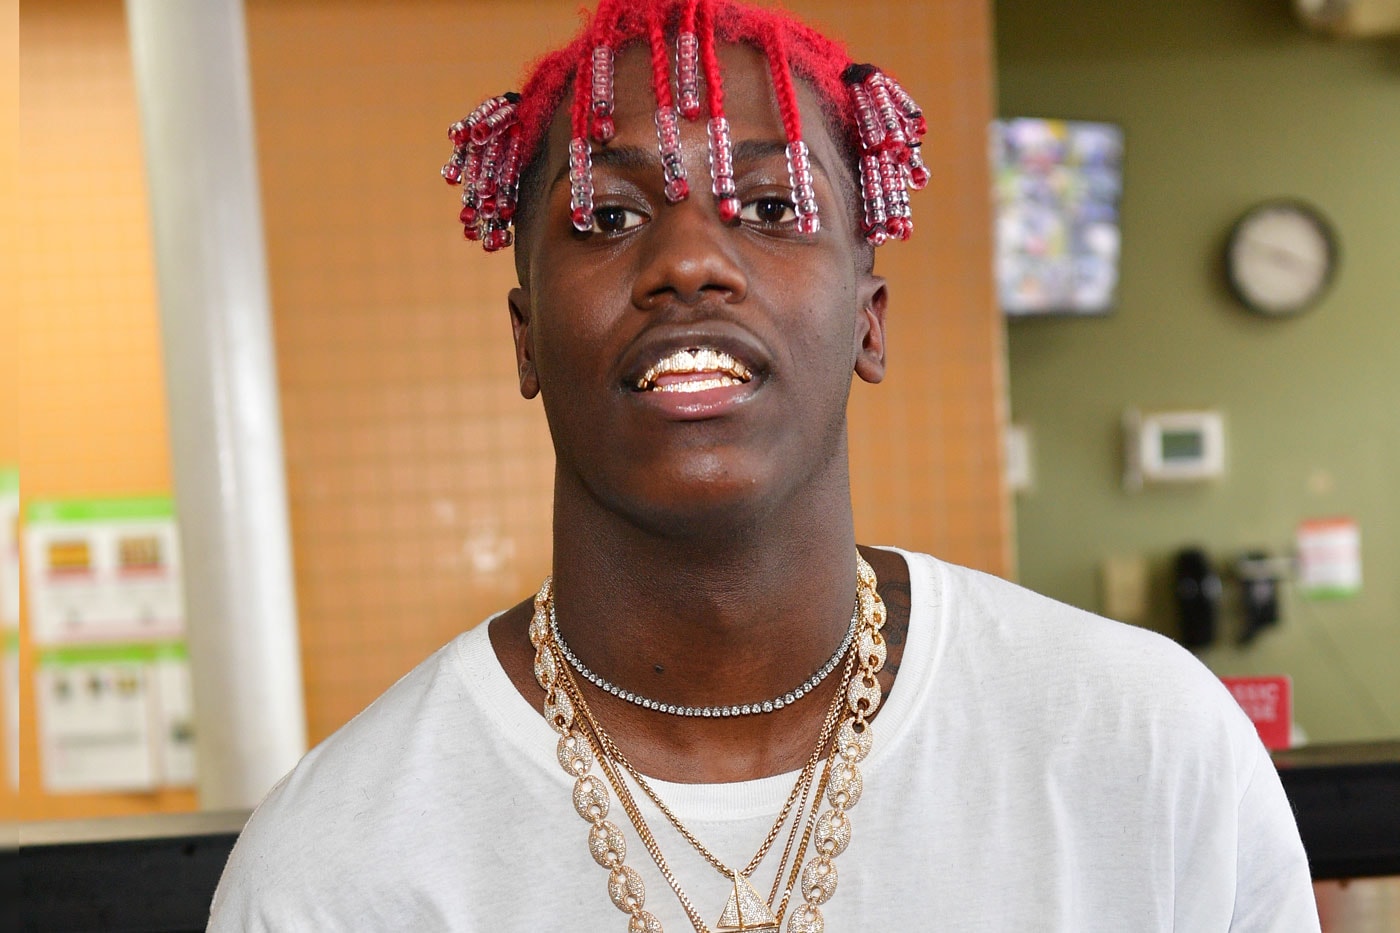 Lil Yachty Stars on the Cover of 'SNEEZE' Magazine's "Youth is Money" Issue